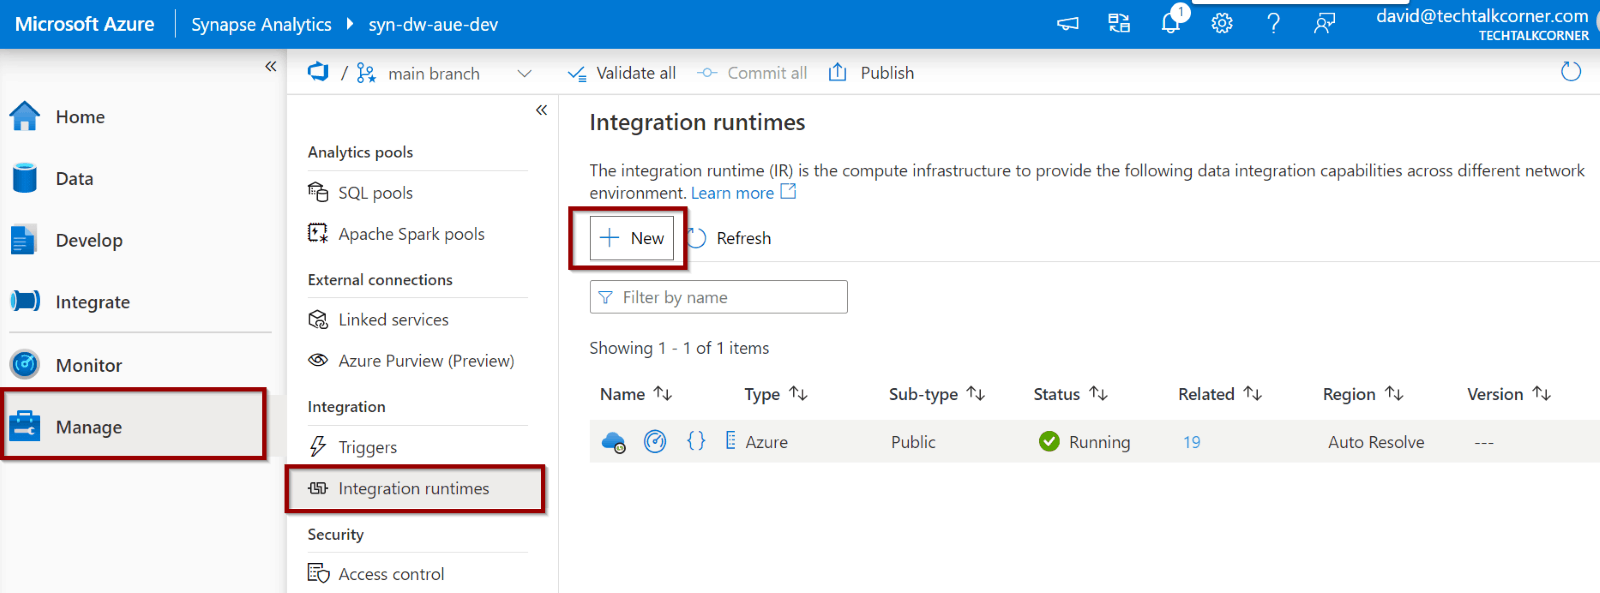 go to the Manage Hub. Then go to integration runtimes and click “new.”